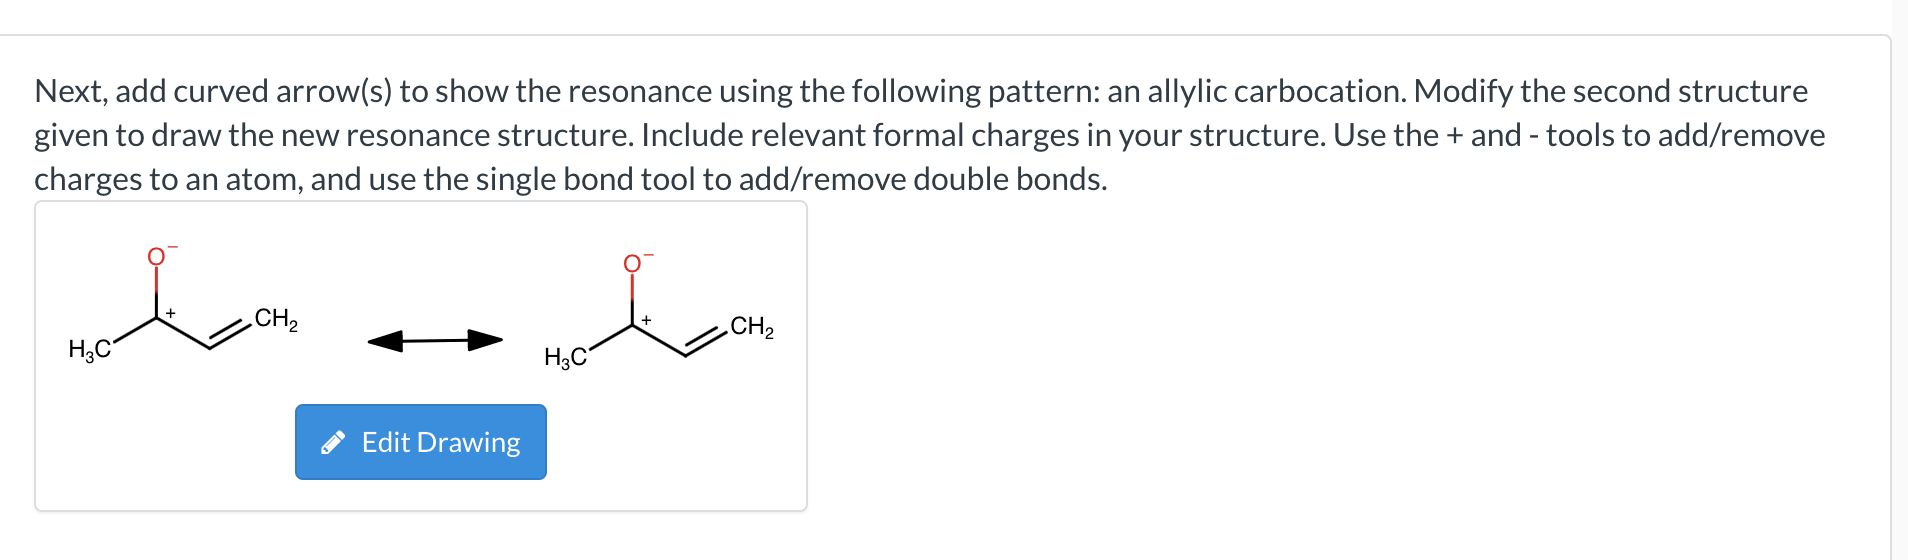 Next, add curved arrow(s) to show the resonance using the following pattern: an allylic carbocation. Modify the second struct